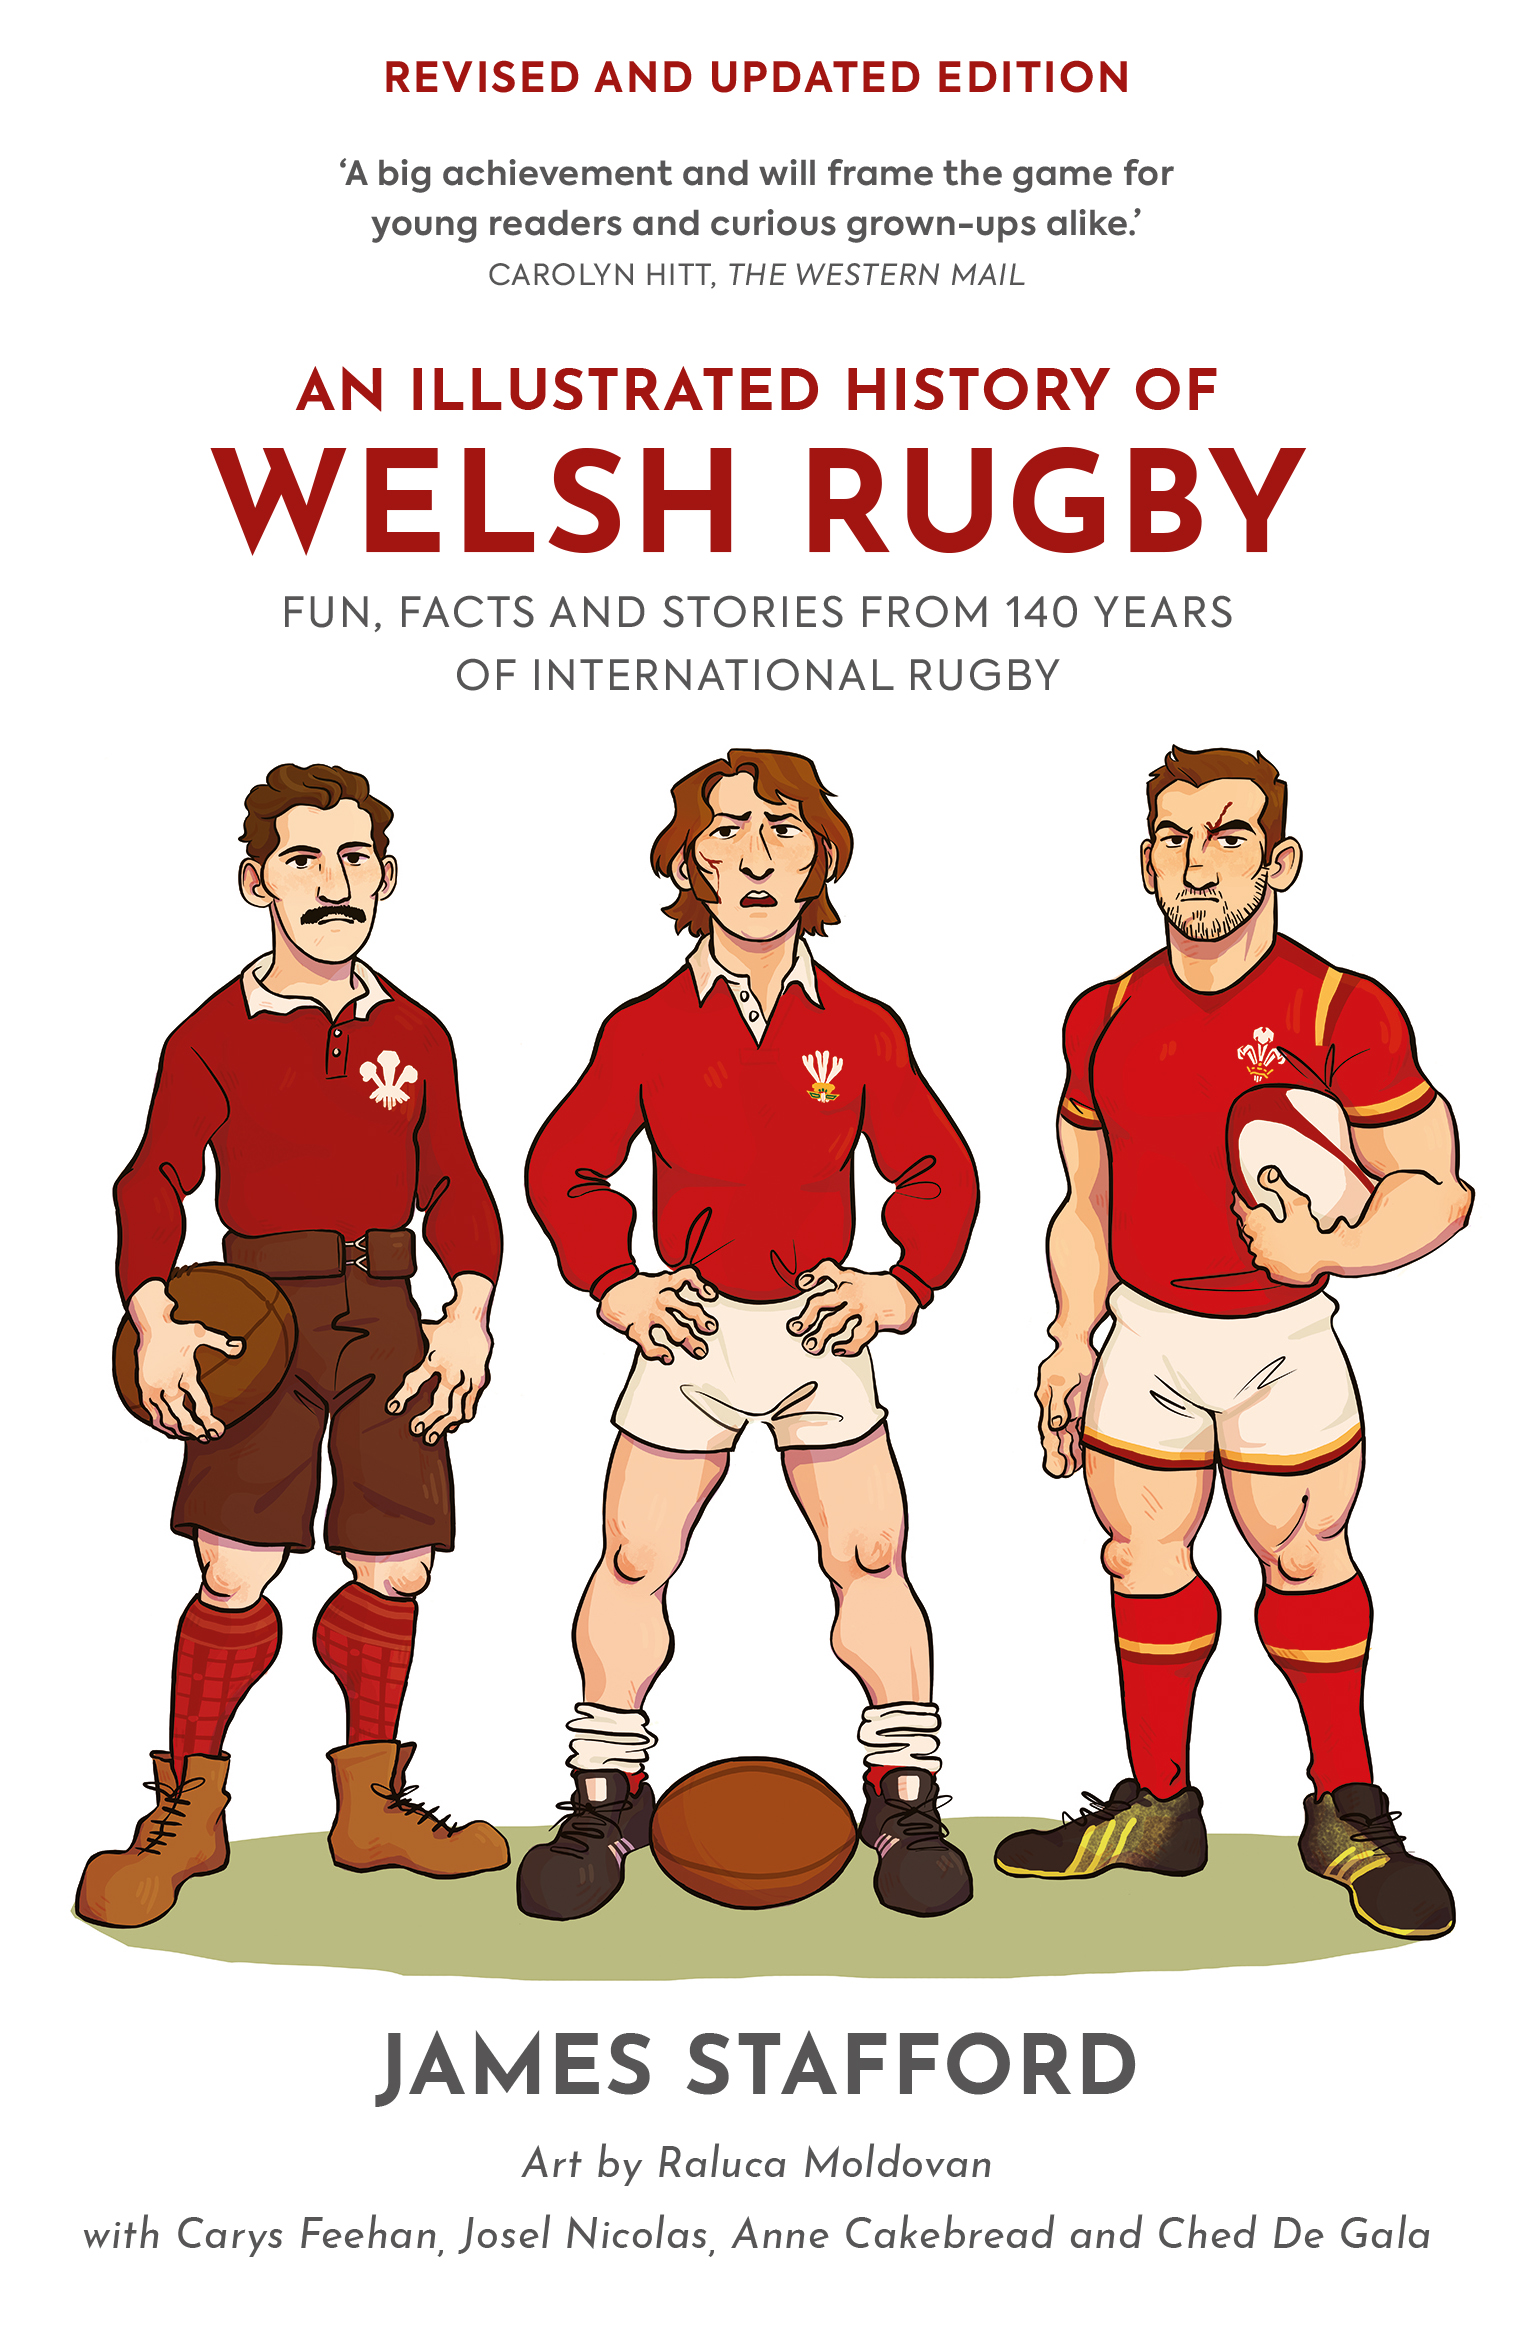 An Illustrated History of Welsh Rugby